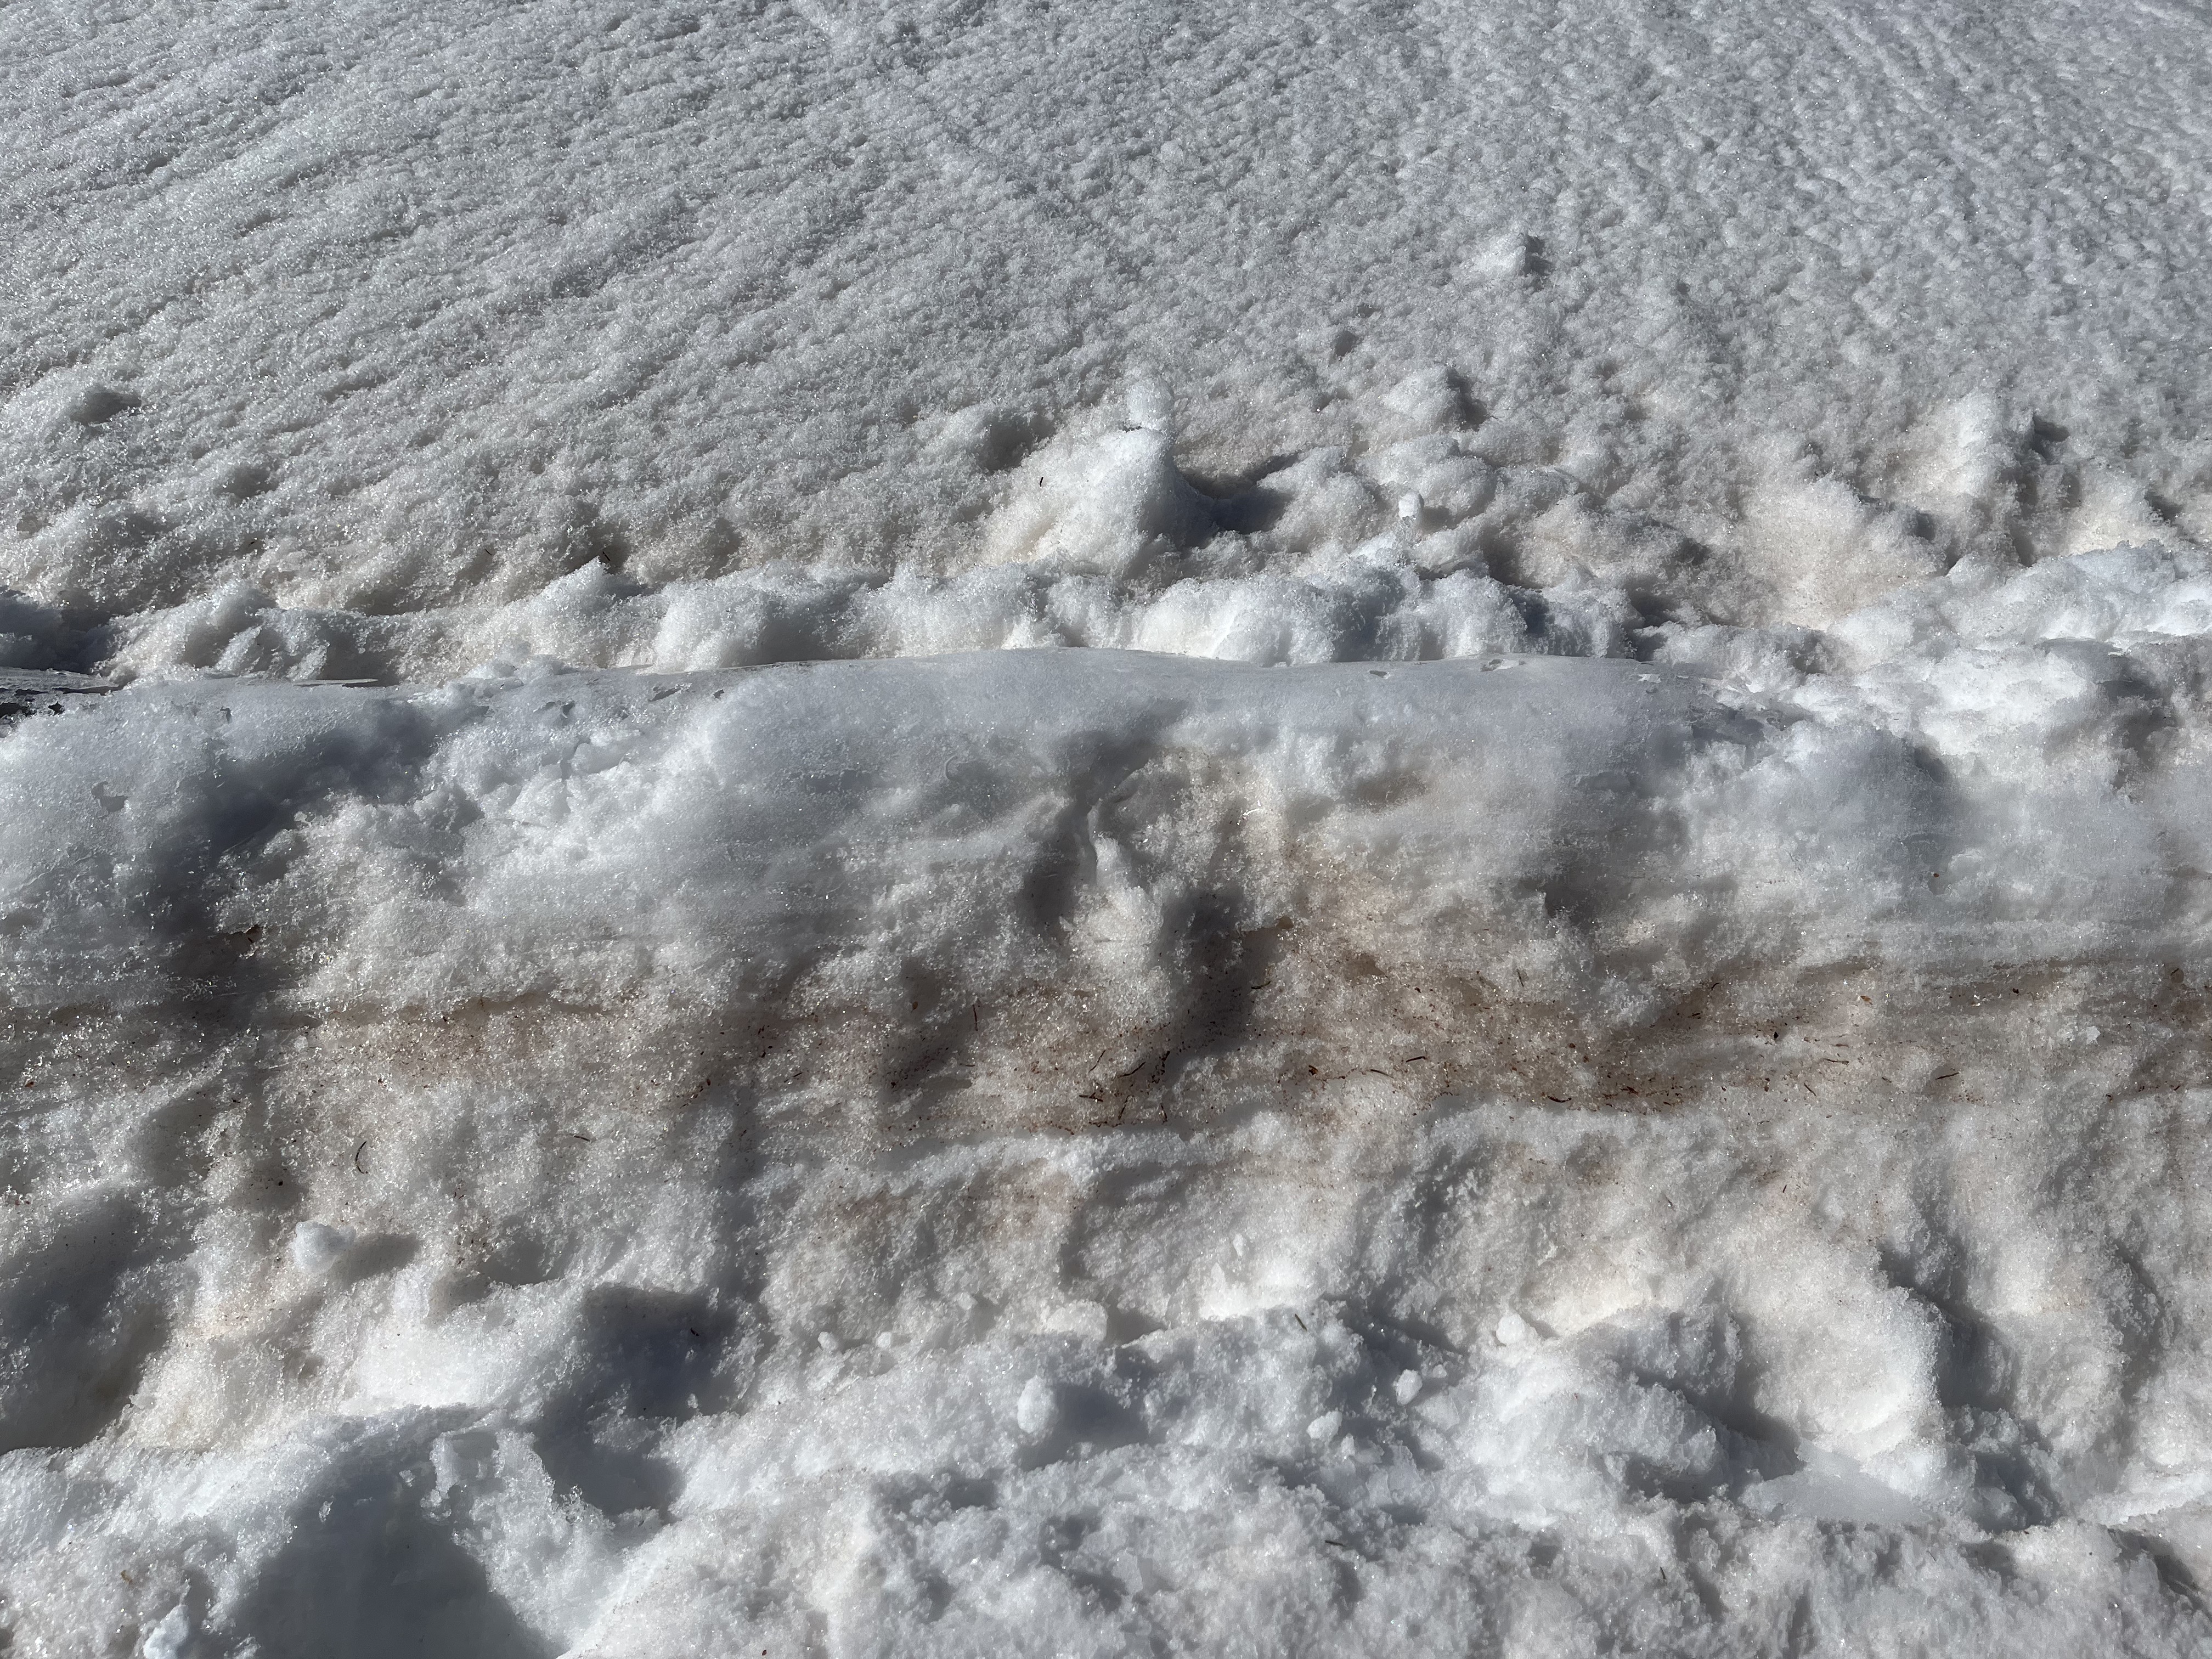 A layer of dust is visible in the snowpack.